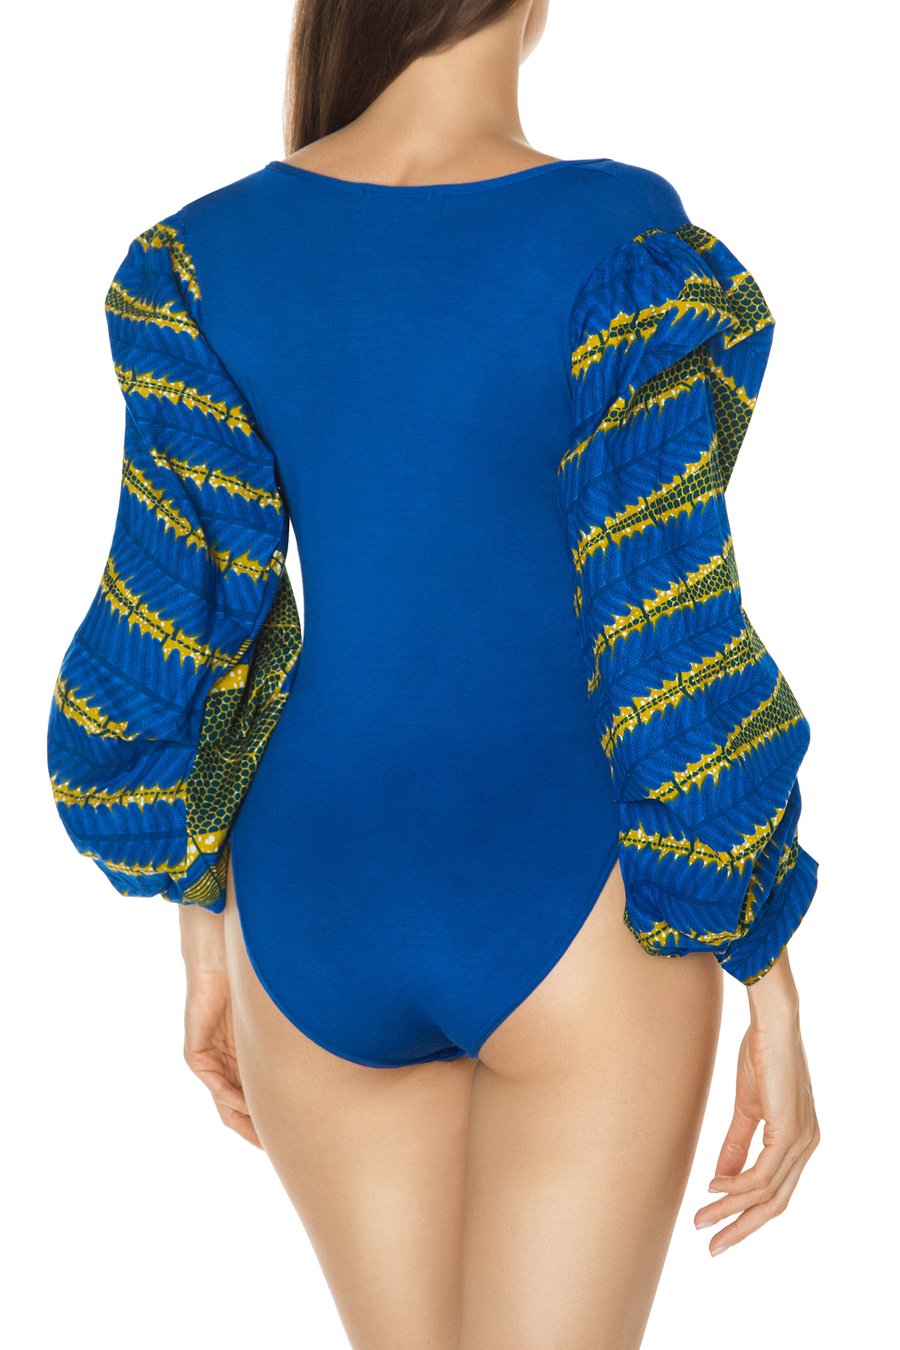 Naa African print bodysuit exaggerated sleeve - OHEMA OHENE AFRICAN INSPIRED FASHION